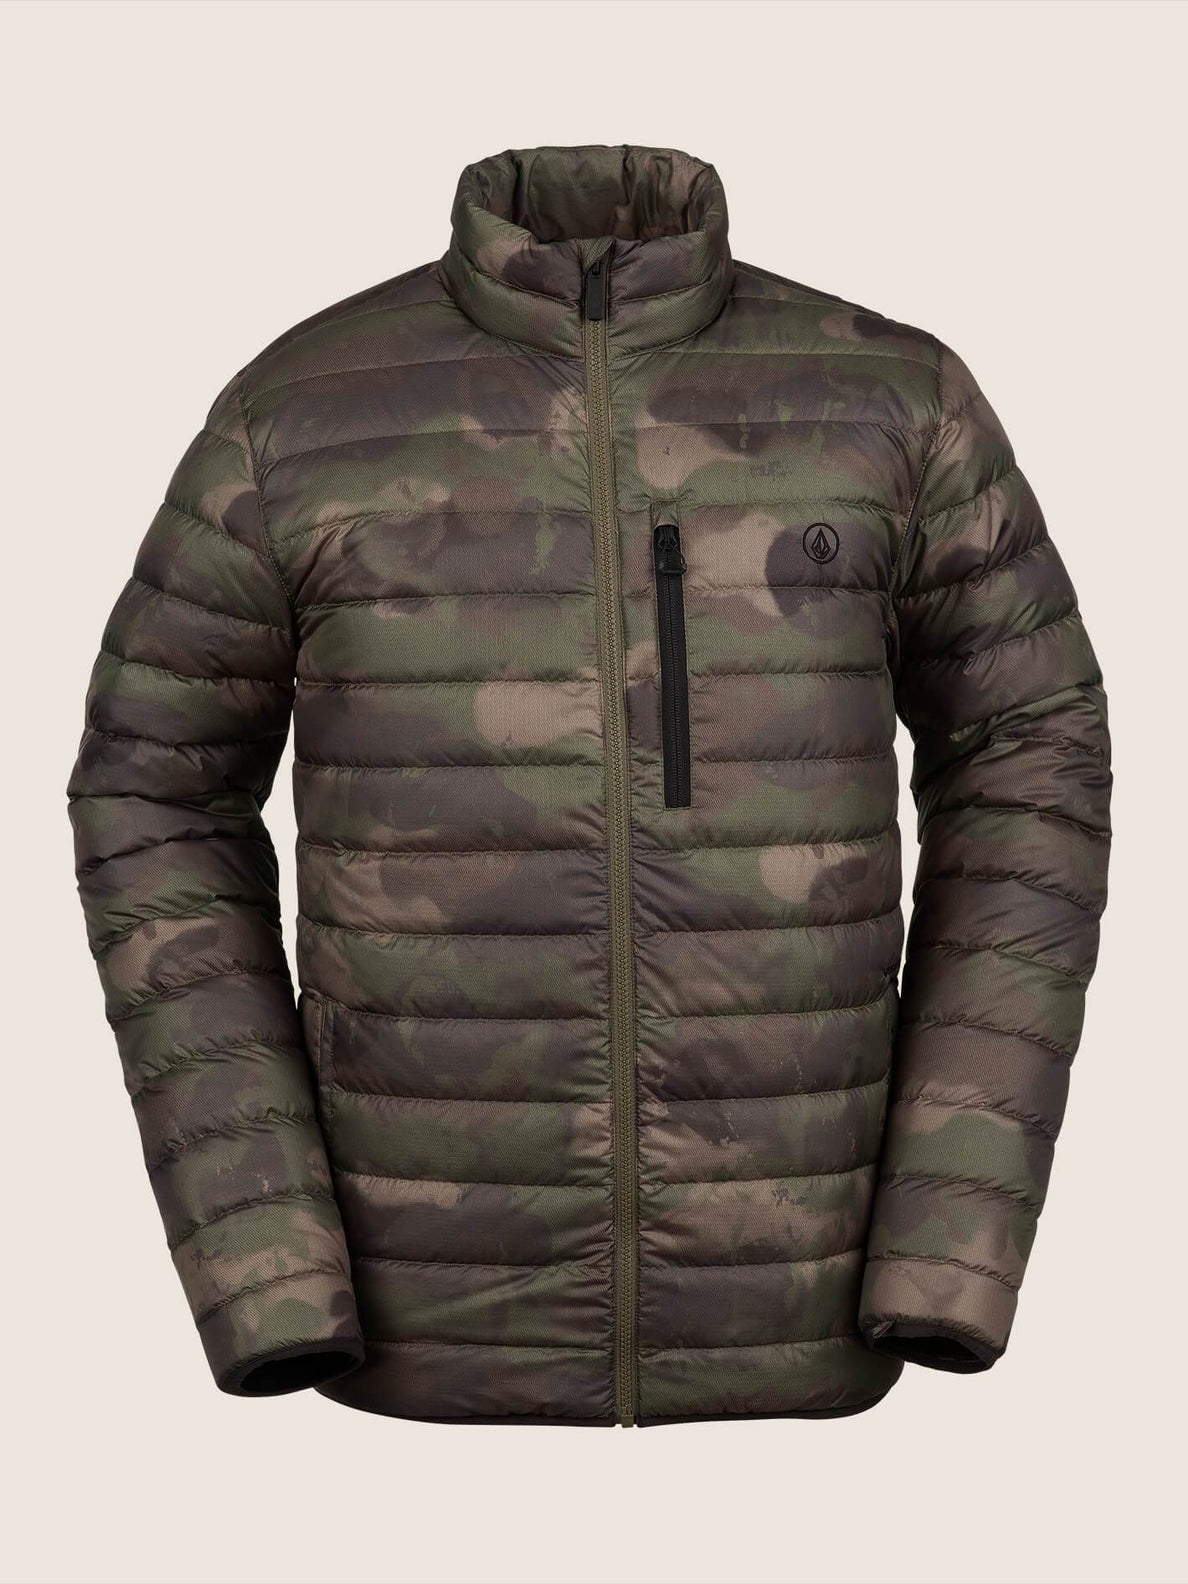 Chaqueta de snow Puff Puff Give  - Camouflage